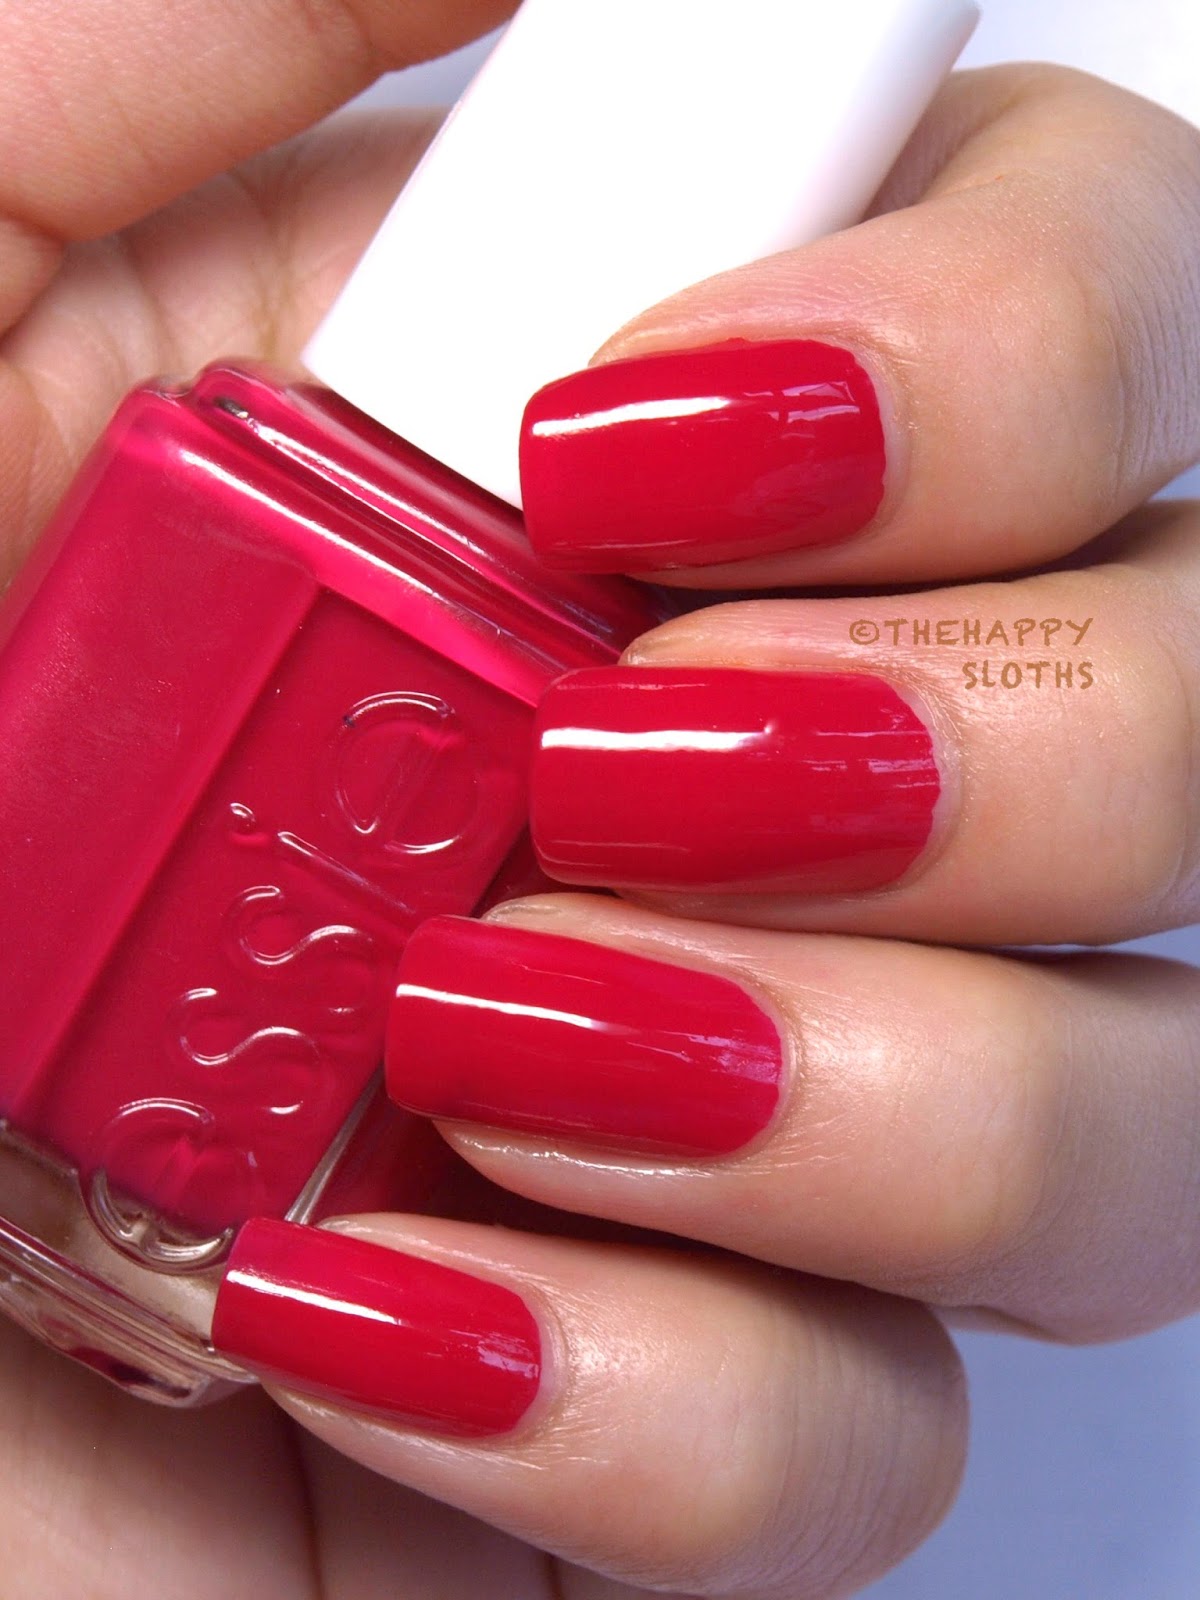 Essie Summer 2014 Nail Polish Collection: Review and Swatches